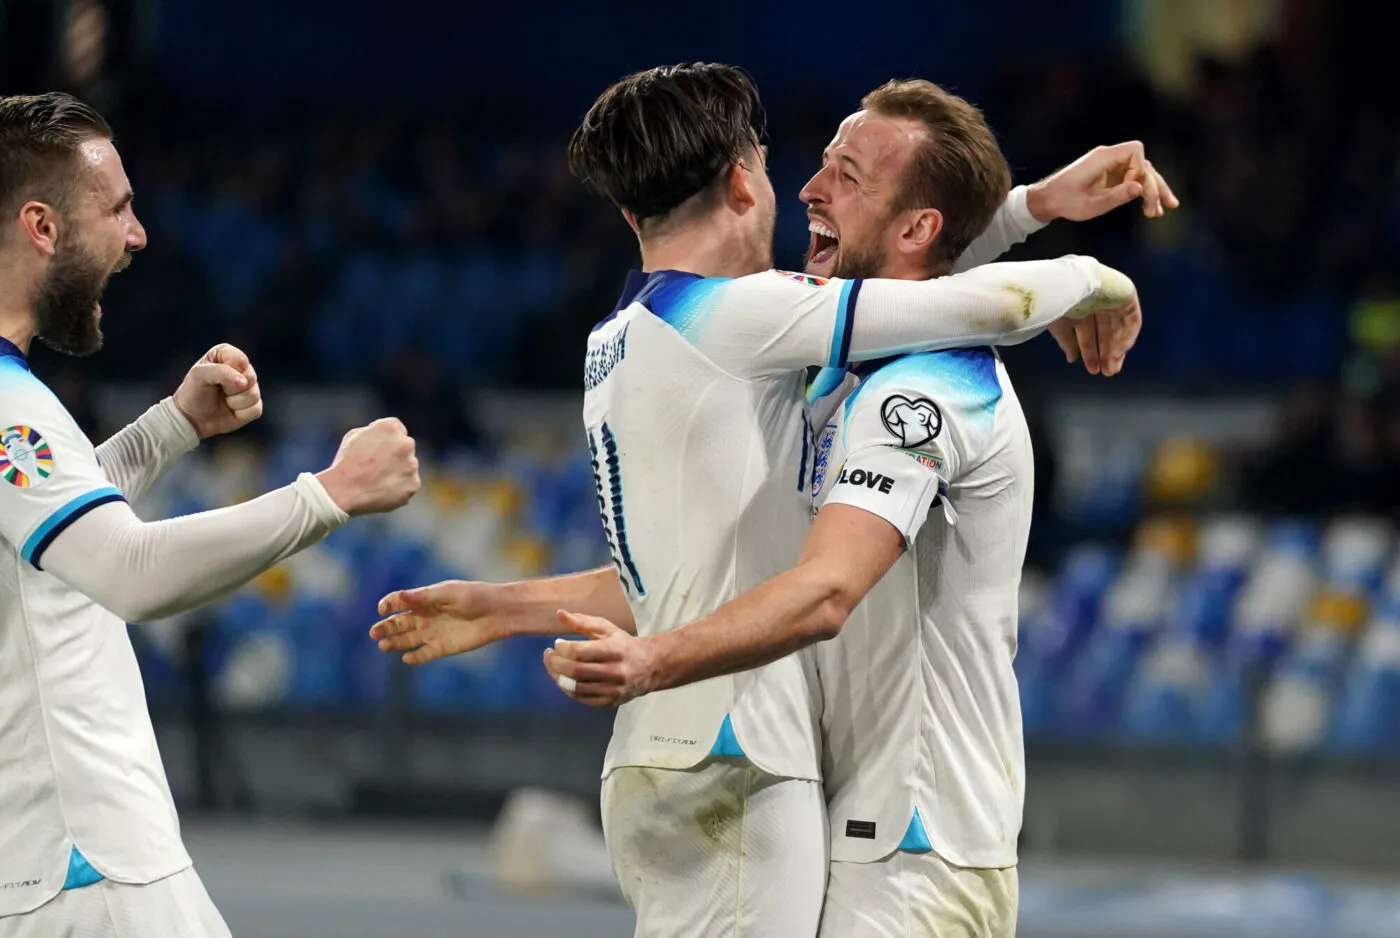 England's Harry Kane (right) celebrates scoring their side's second goal of the game from the penalty spot during the UEFA Euro 2024 qualifying match at the Diego Armando Maradona Stadium in Naples, Italy. Harry Kane has become England's all-time record goalscorer, with a penalty in the European Championship qualifying match against Italy in Naples moving him clear of Wayne Rooney and on to 54. Picture date: Thursday March 23, 2023. - Photo by Icon sport